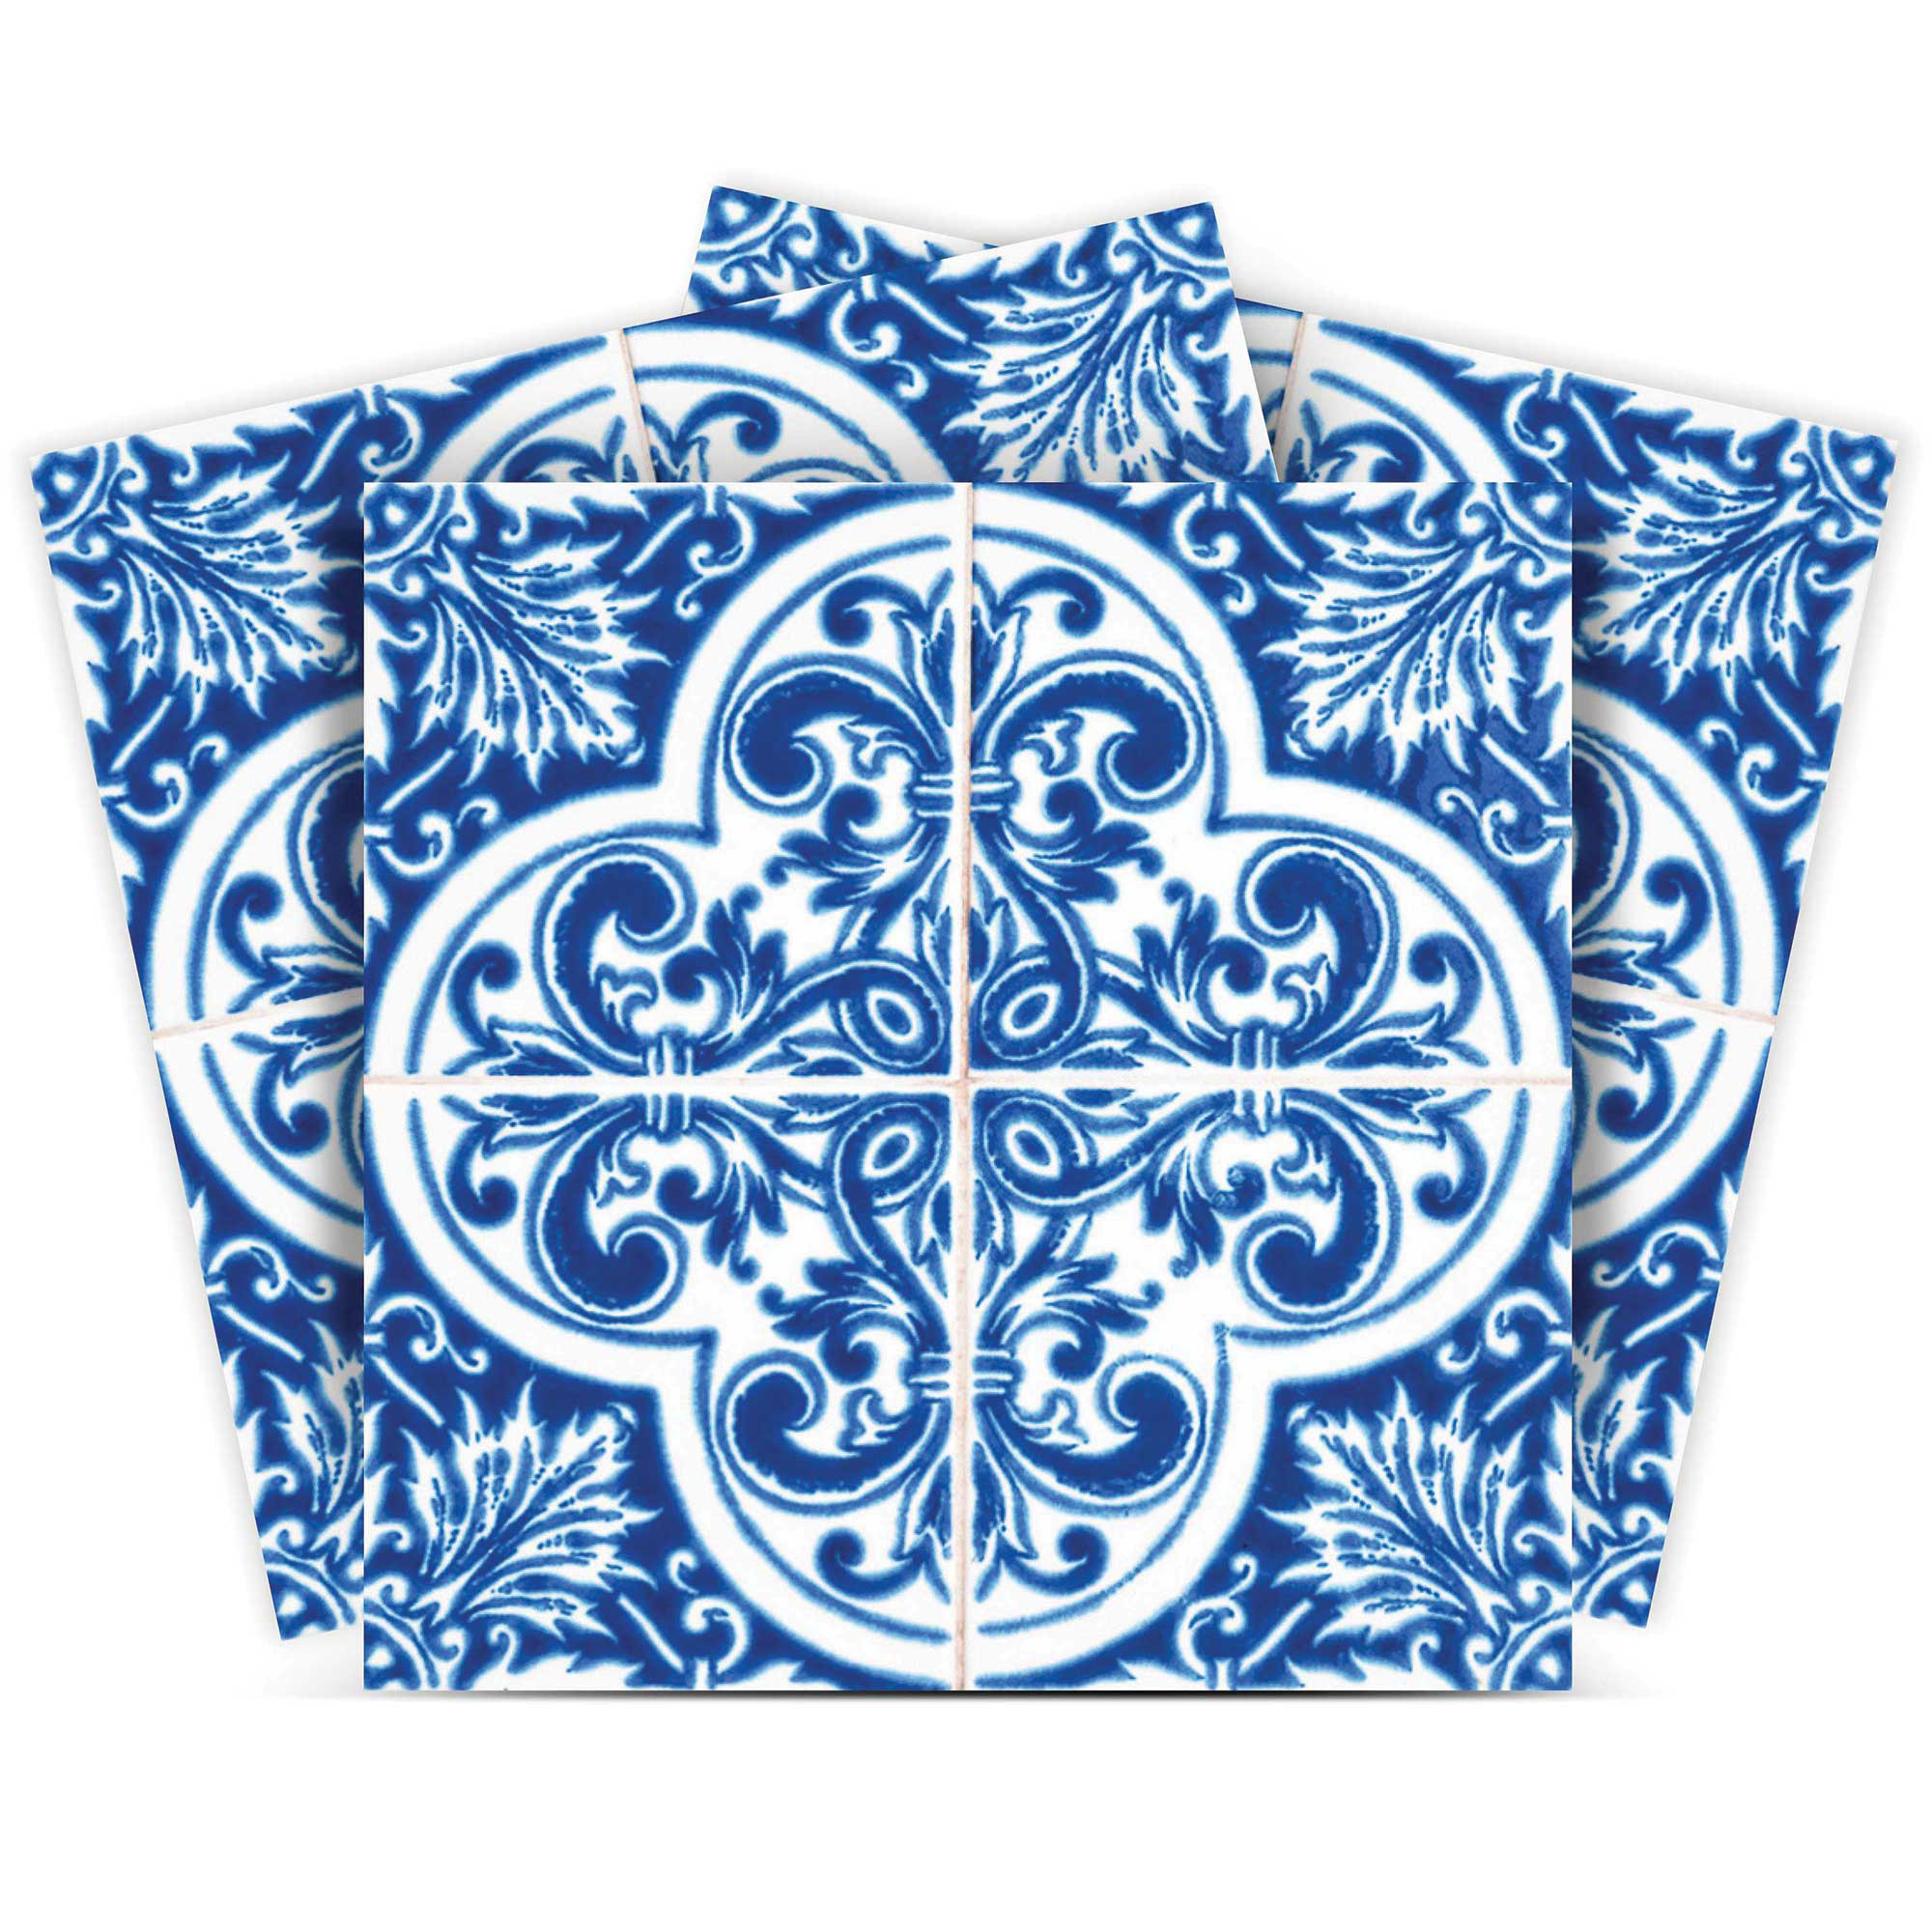 6" X 6" Blue and White Cross Peel And Stick Tiles-400117-1